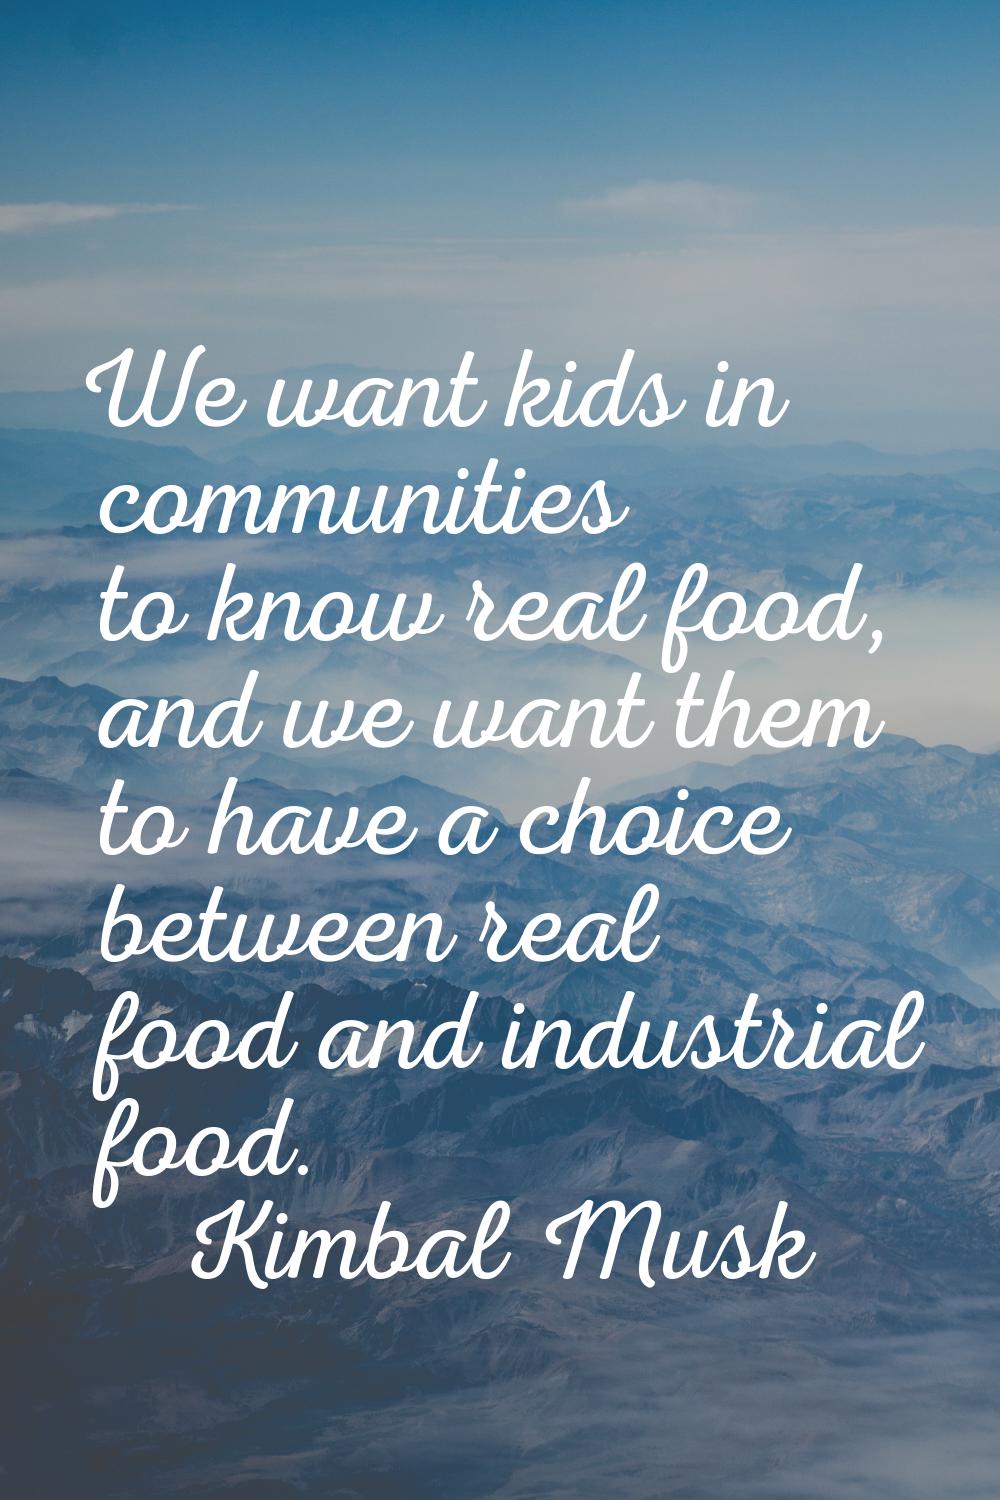 We want kids in communities to know real food, and we want them to have a choice between real food 